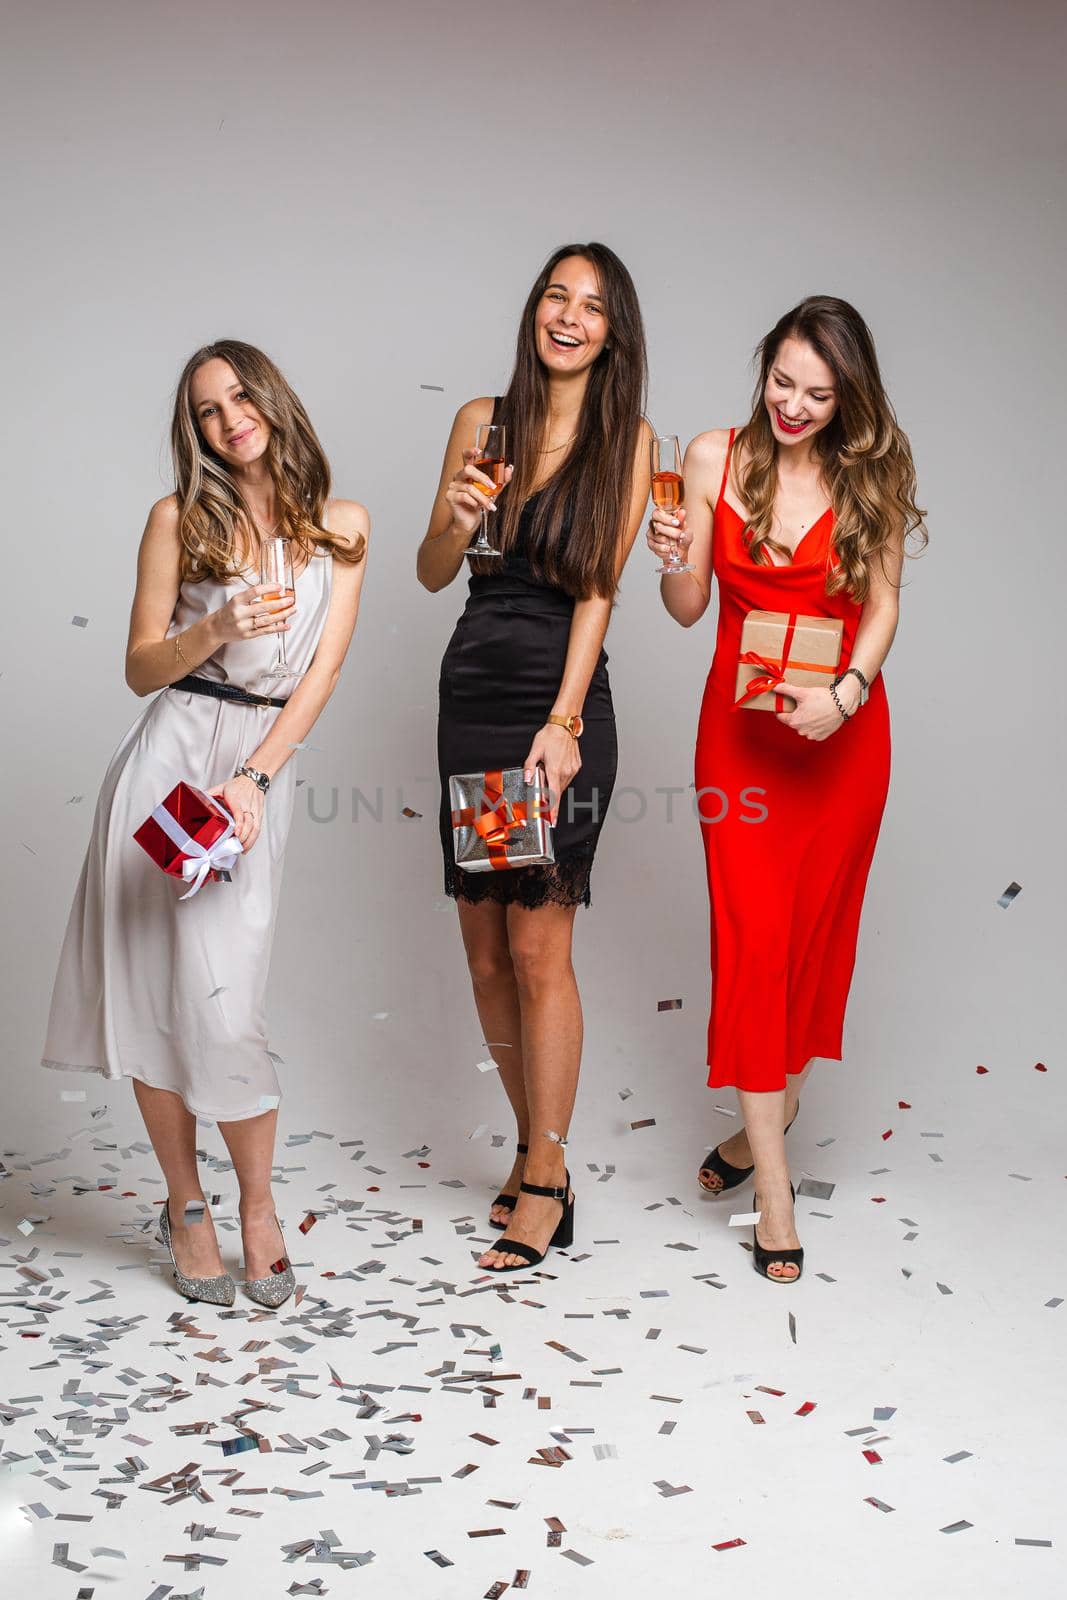 three cheerful friends in beautiful dresses celebrate new year with glasses of wine by StudioLucky